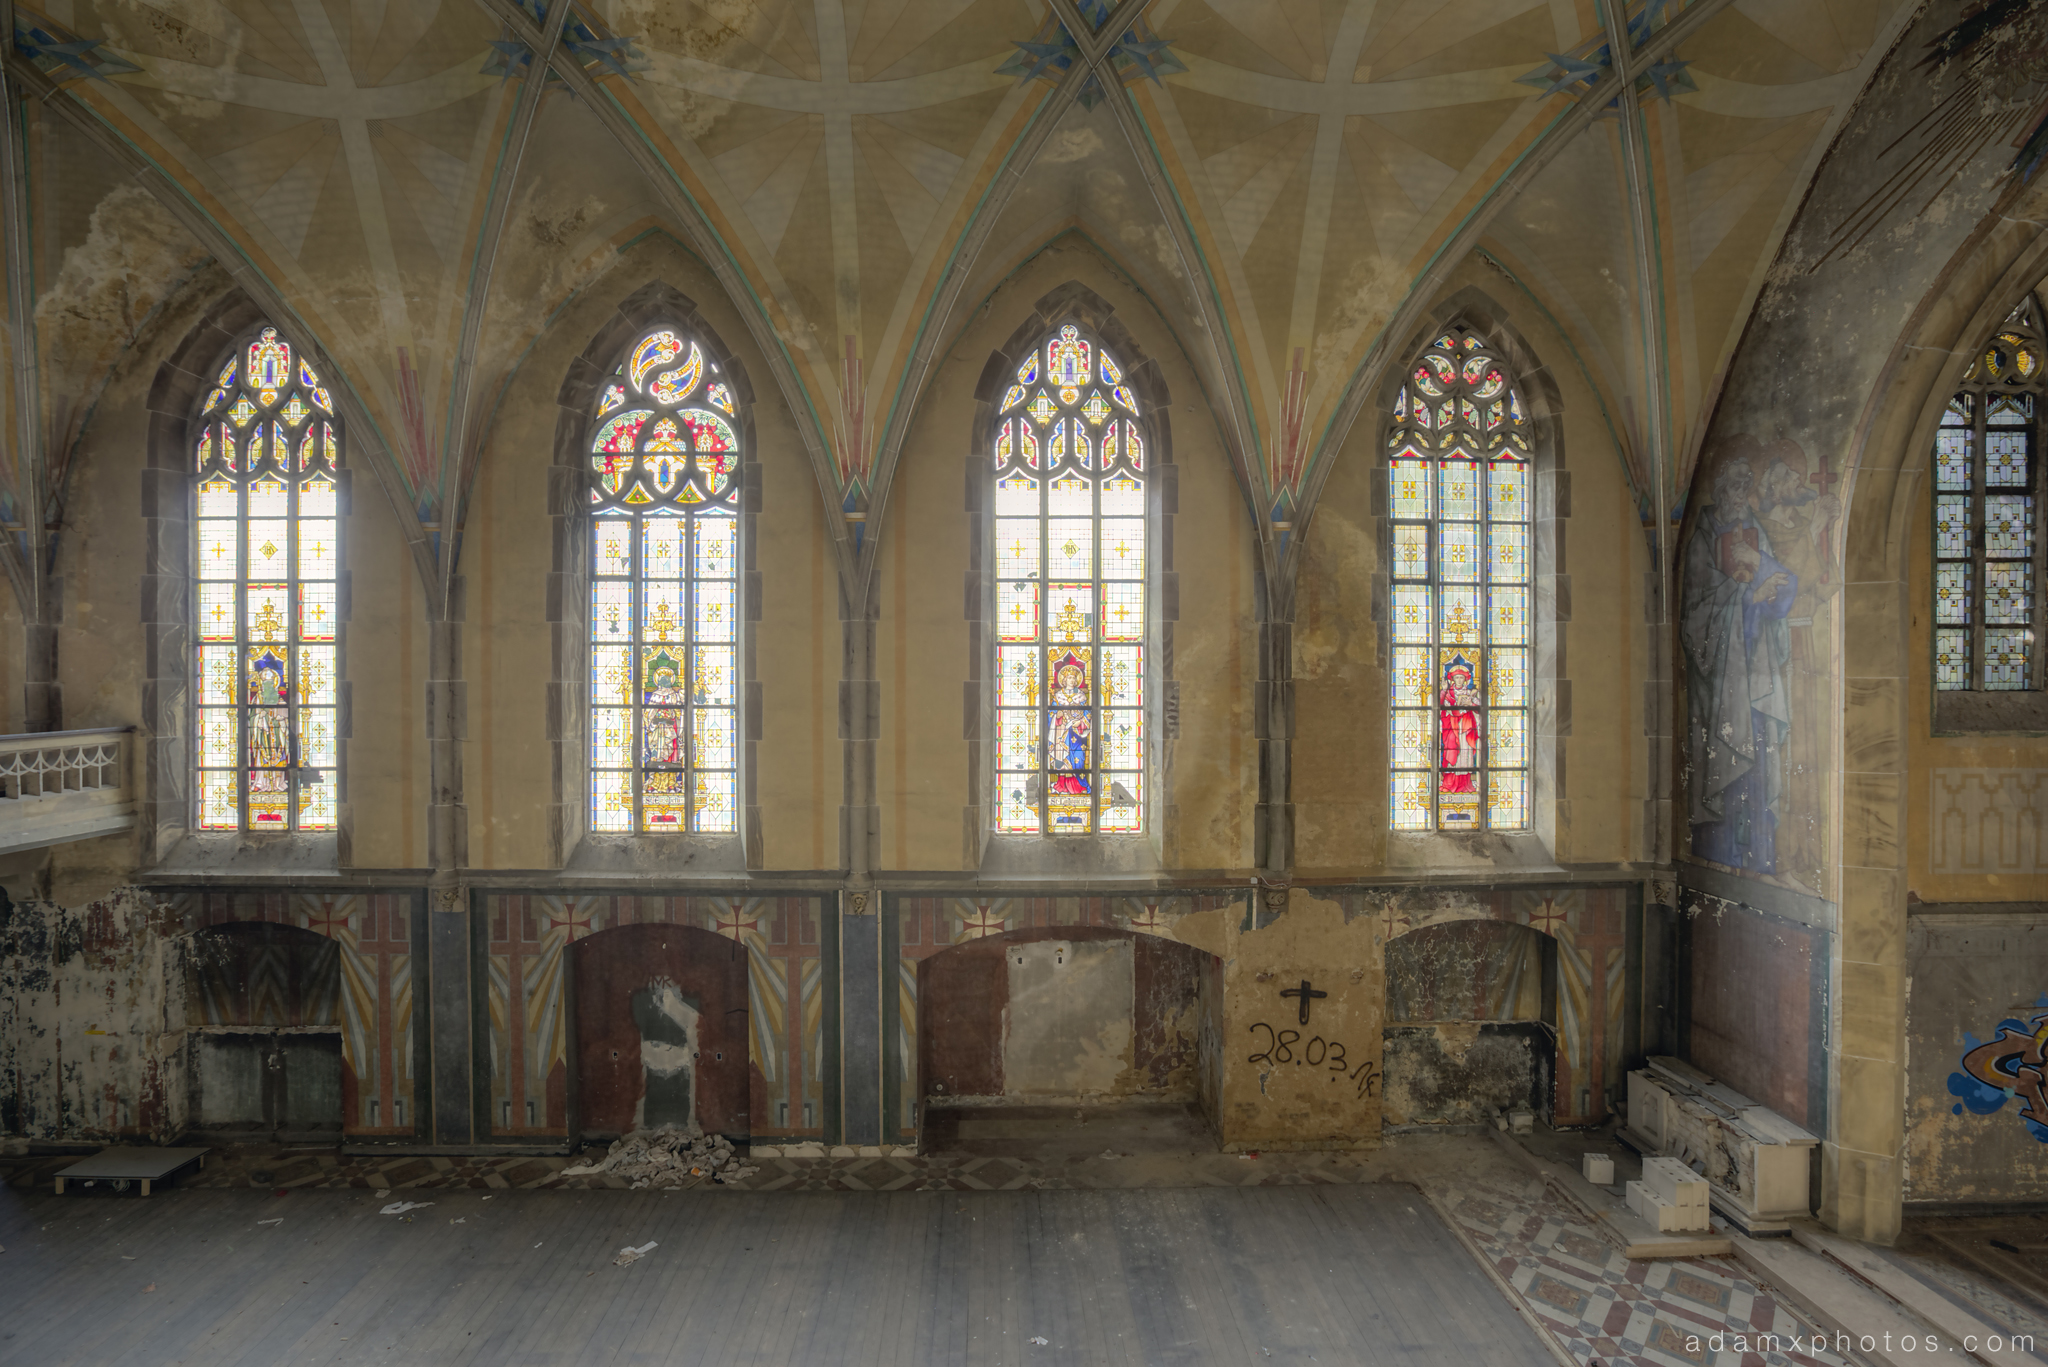 Side view stained glass windows ornate Adam X Urbex UE Urban Exploration Germany chapel church abandoned derelict unused empty disused decay decayed decaying grimy grime